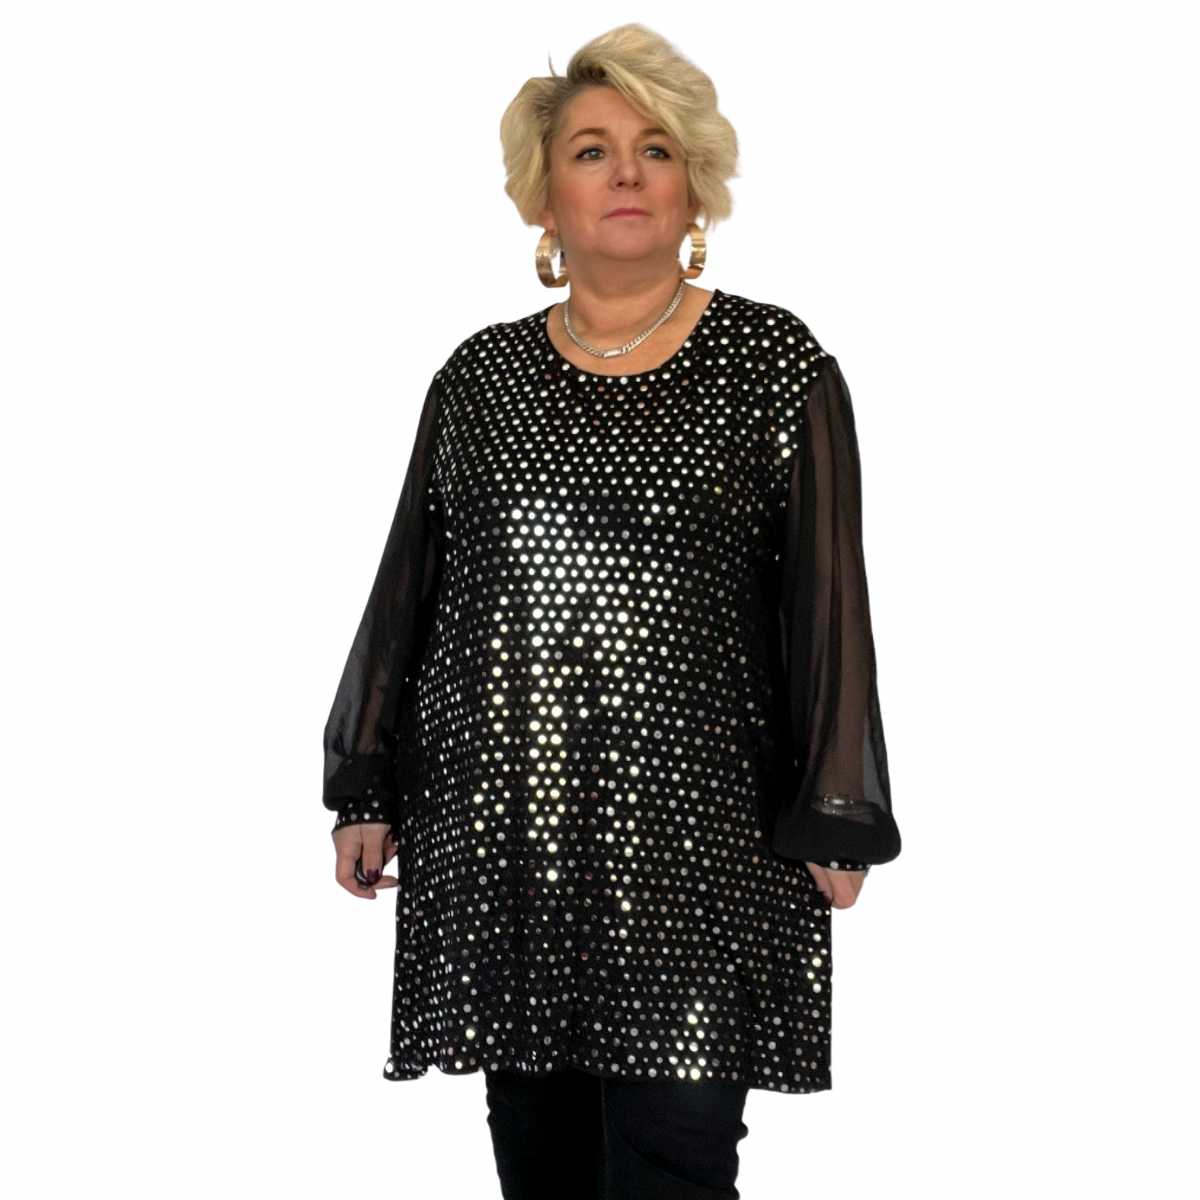 ROCKTHOSECURVES BLACK CHIFFON SLEEVE LONG TOP WITH GOLD FOIL SEQUINS